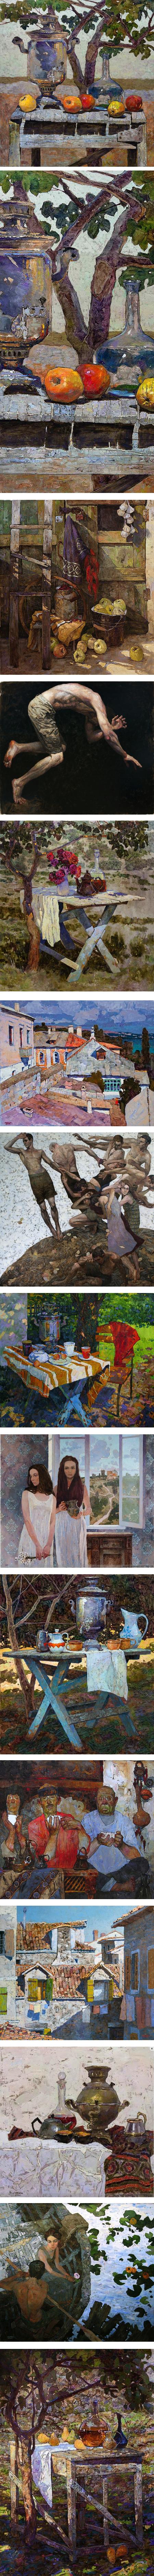 Denis Sarazhin, still life, figures, townscape paintings